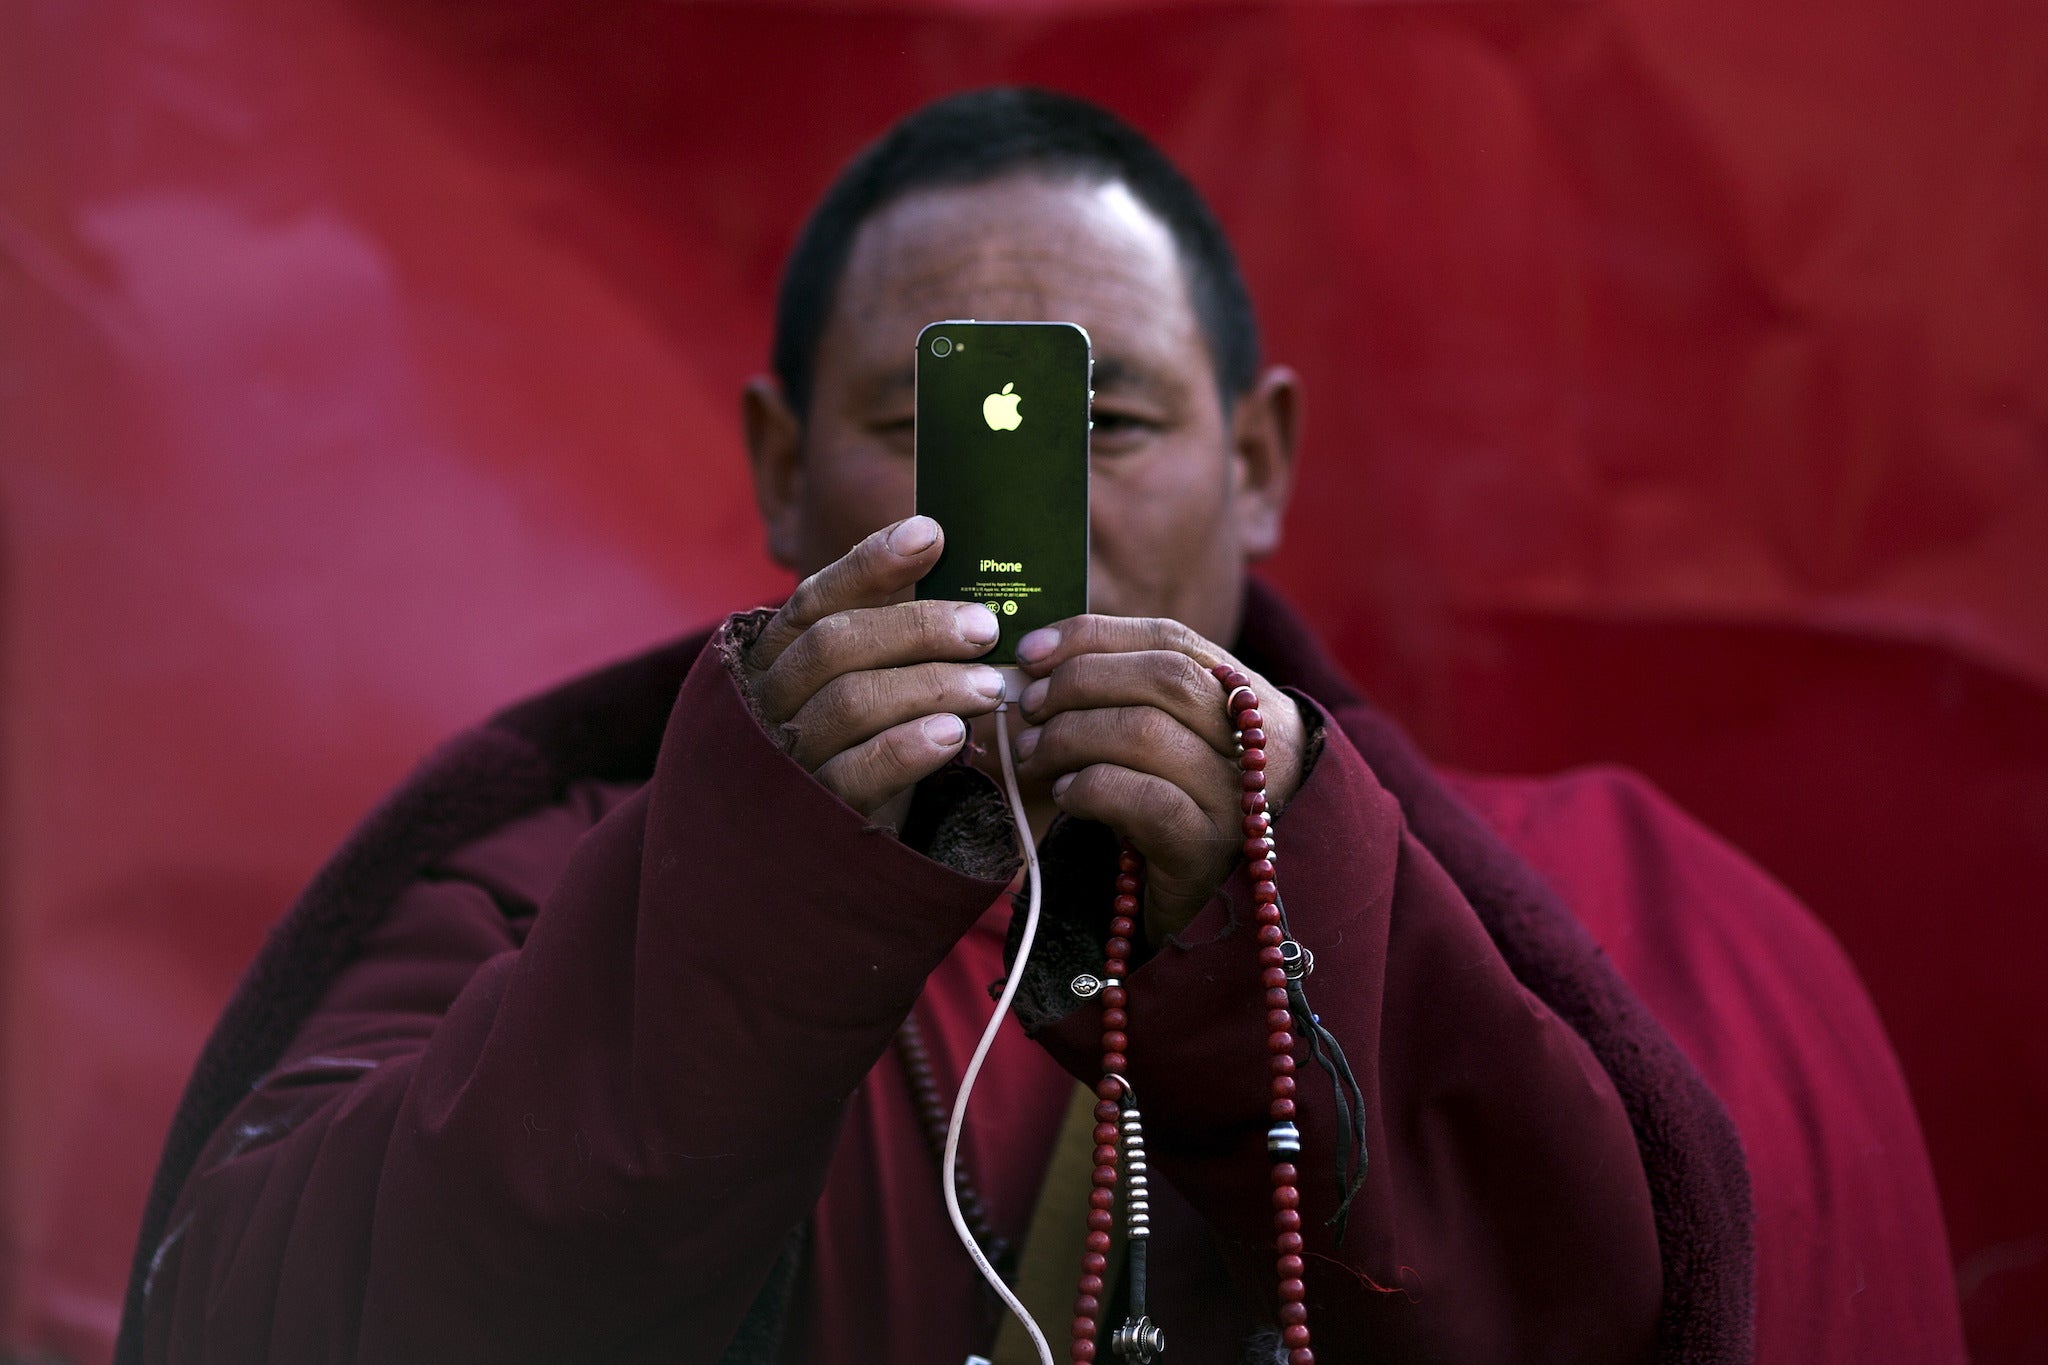 A Tibetan Buddhist monk takes pictures with his smartphone of a daily chanting session at a Buddhist laymen lodge during the Utmost Bliss Dharma Assembly, the last of the four Dharma assemblies at Larung Wuming Buddhist Institute in remote Sertar county, Garze Tibetan Autonomous Prefecture, Sichuan province, China early October 30, 2015